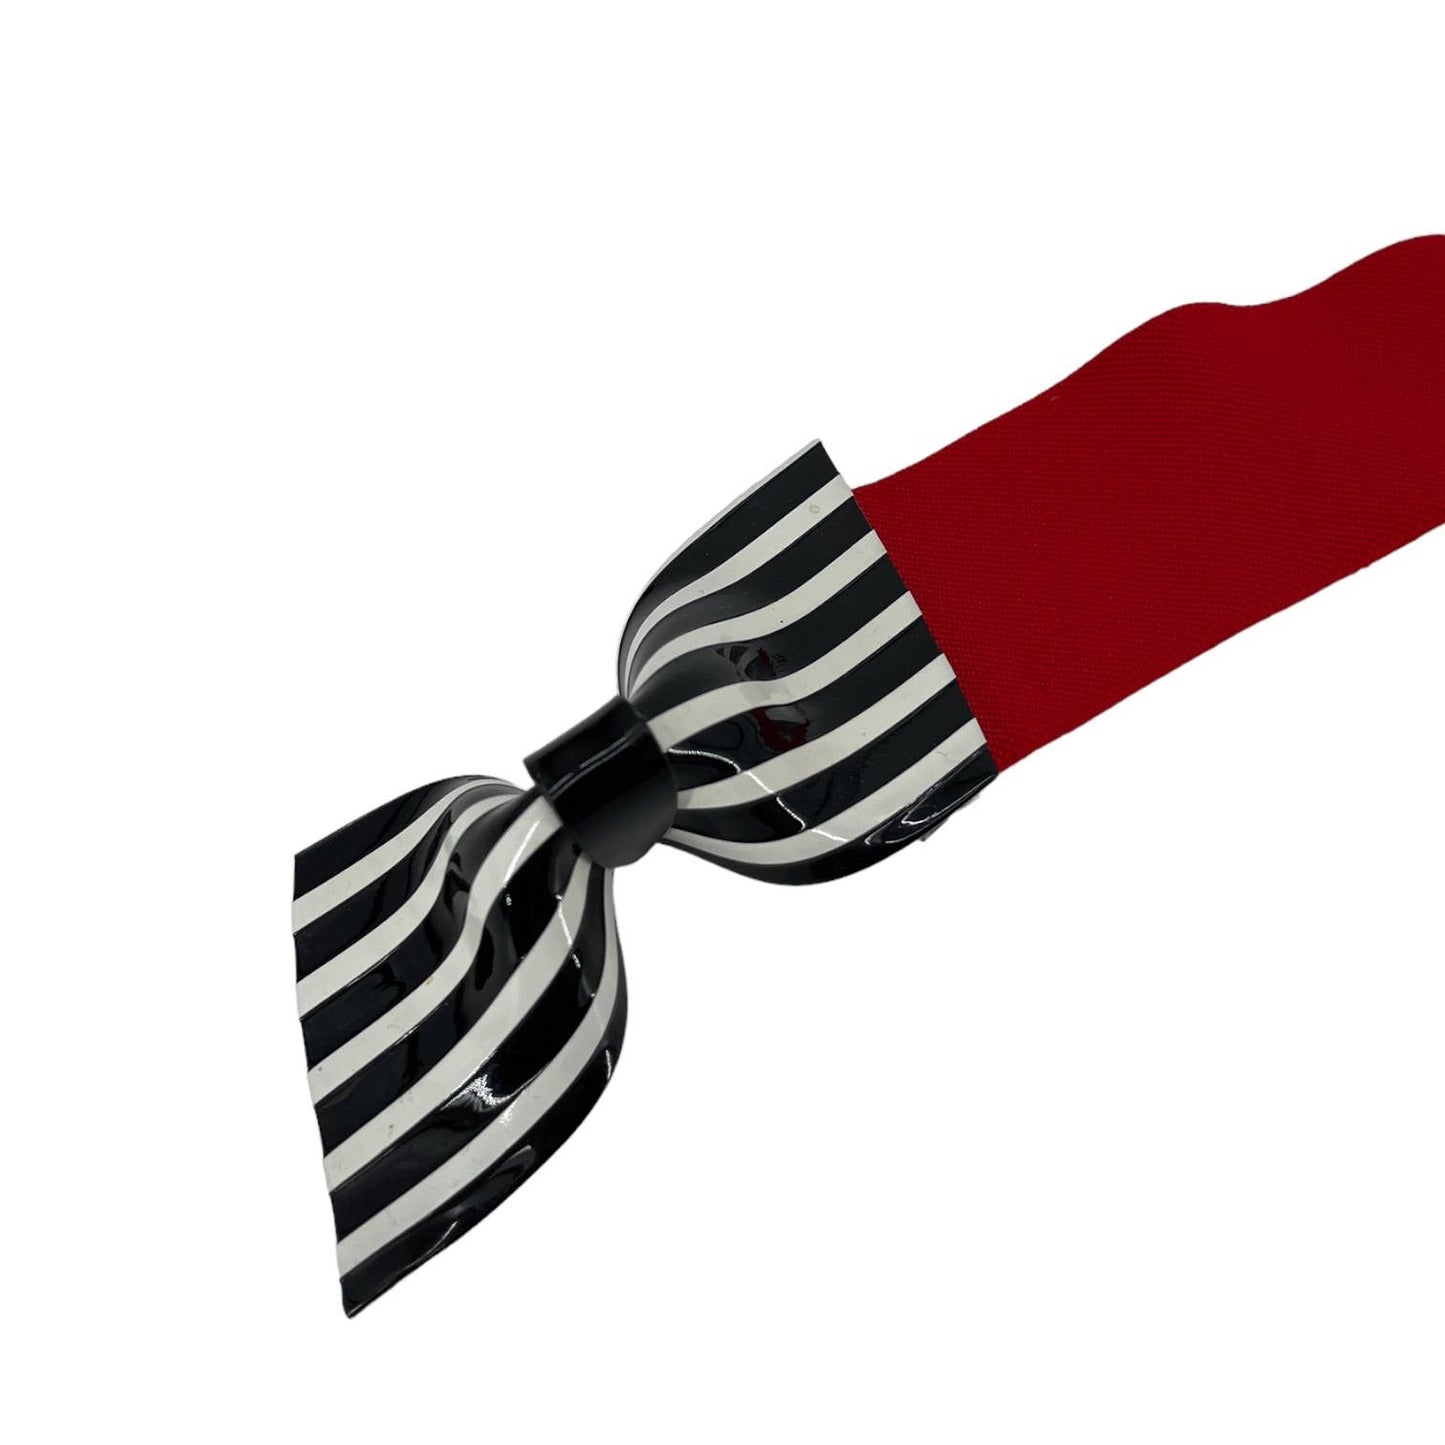 Vintage 80s Red Elastic Belt with Black and White Stripe Bow Molded Plastic M L